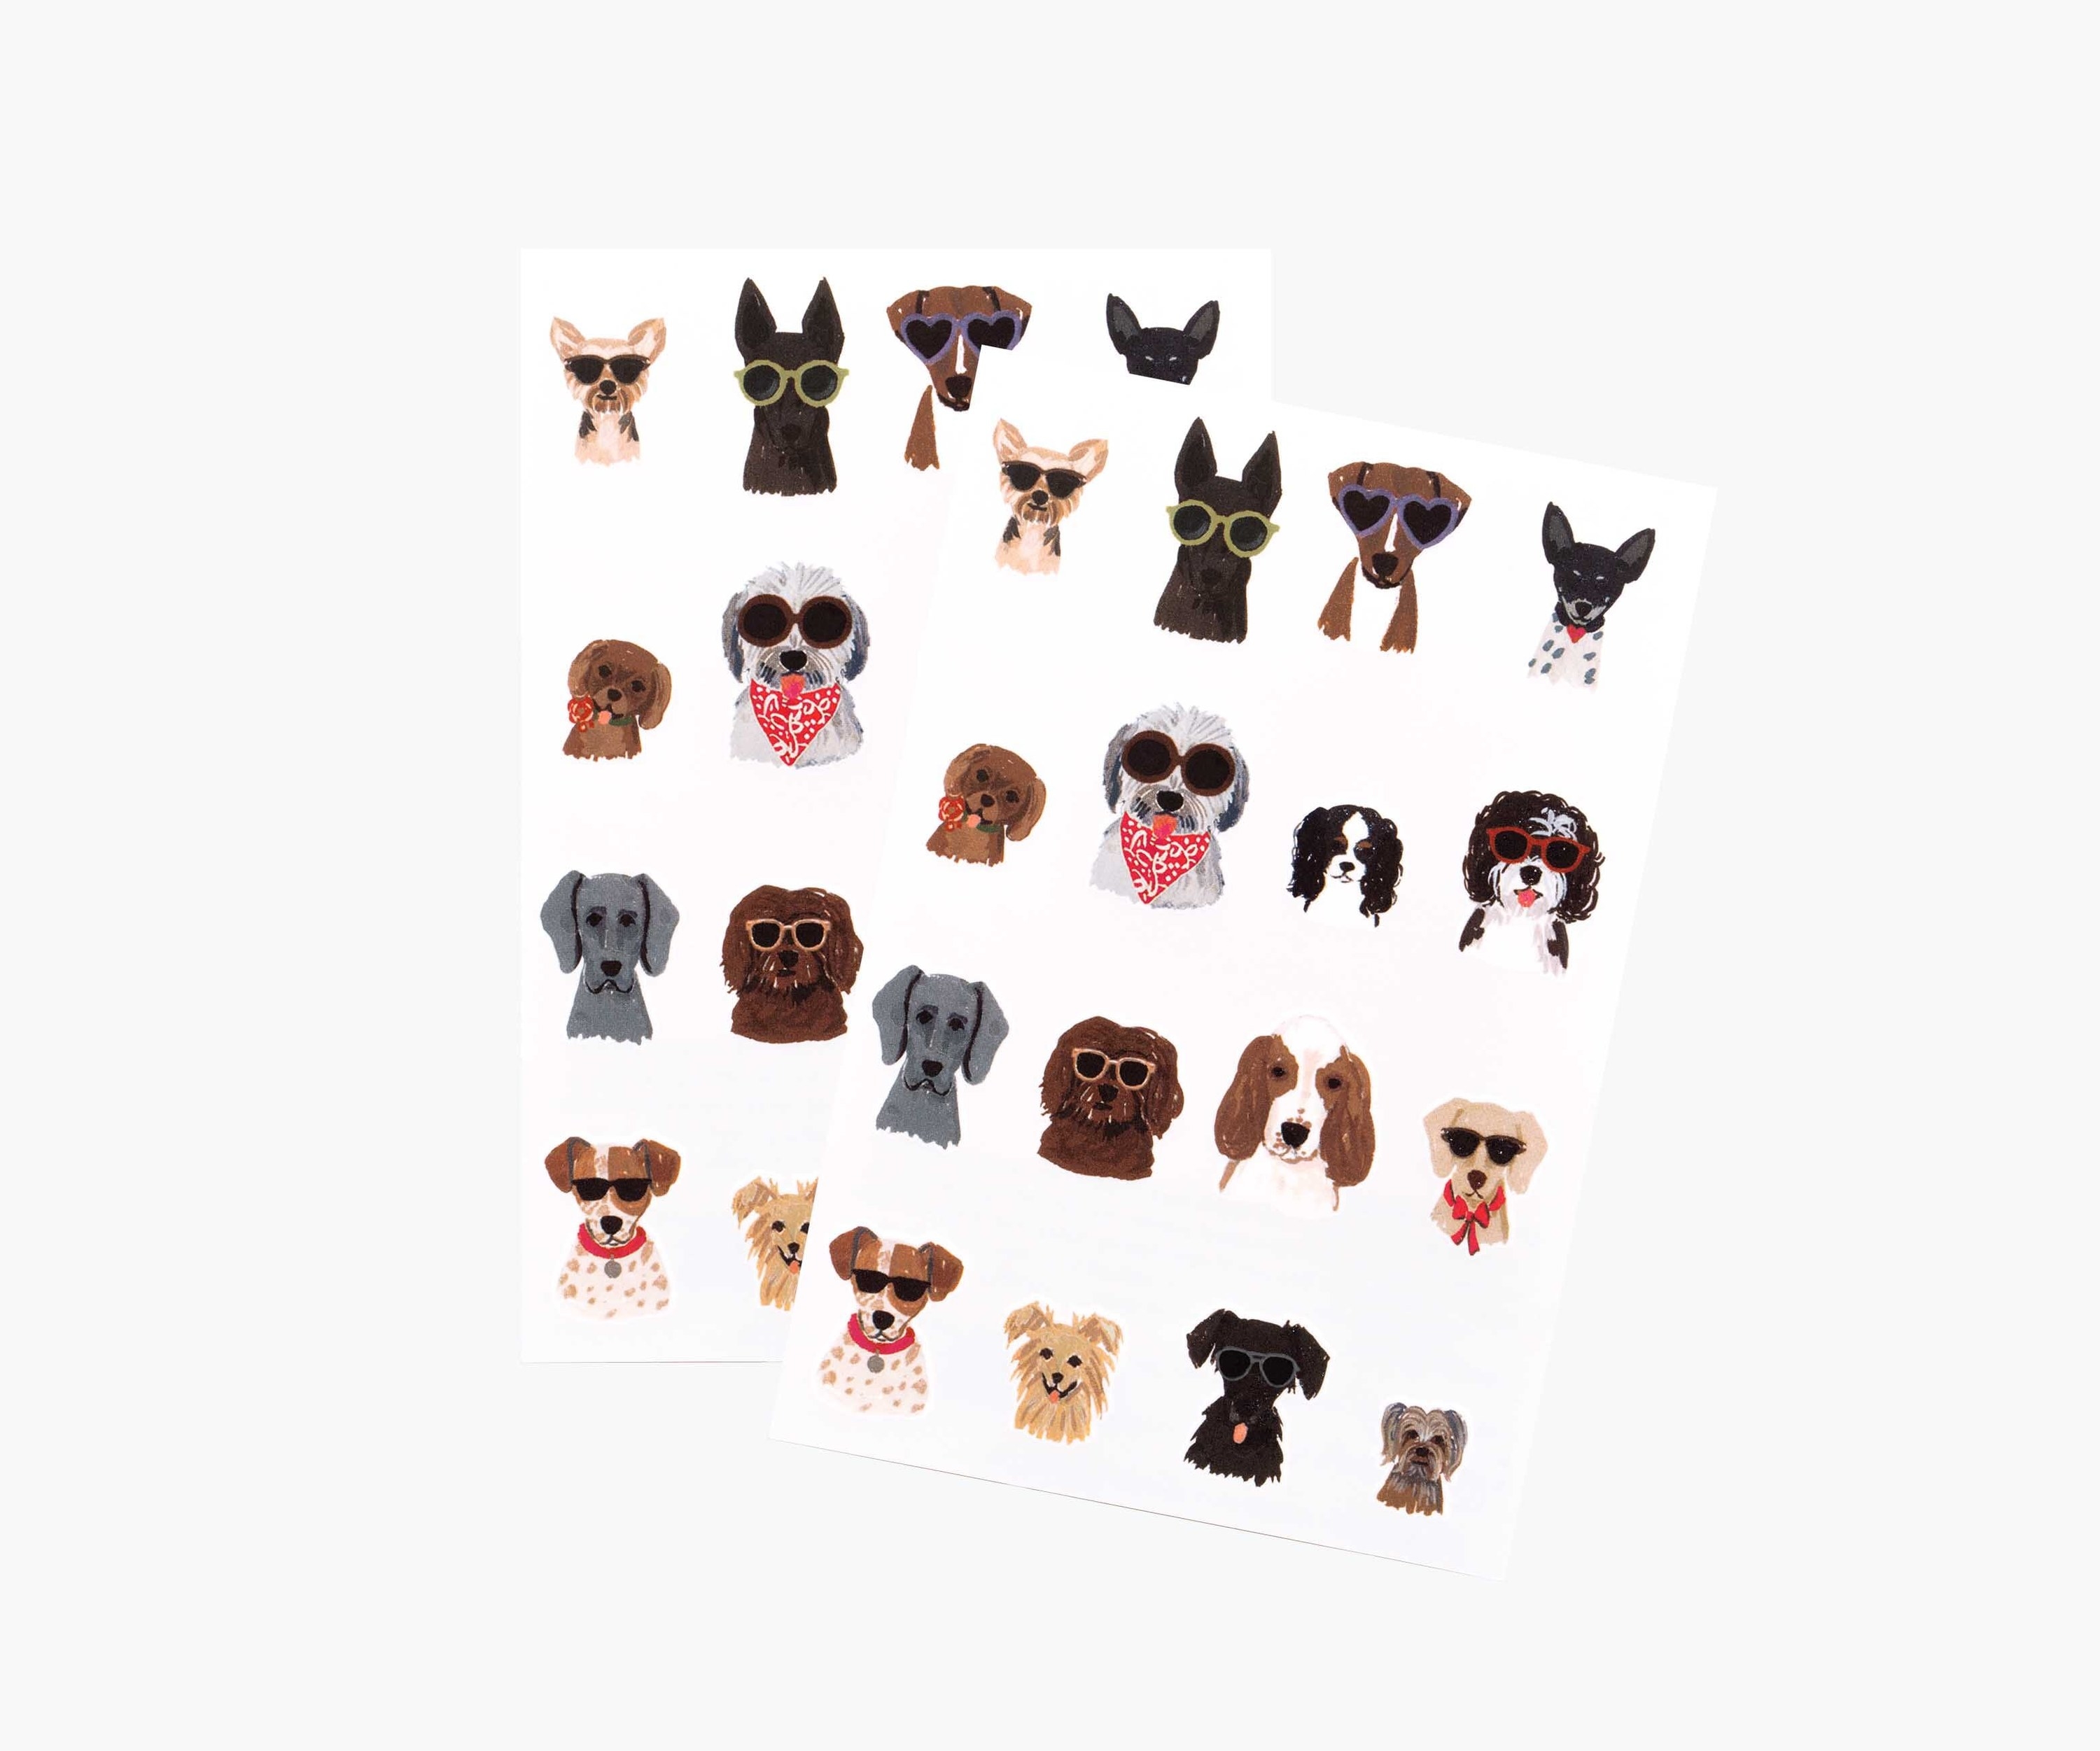 The two sheets of small tattoos of different breeds of dogs, some wearing sunglasses and some not